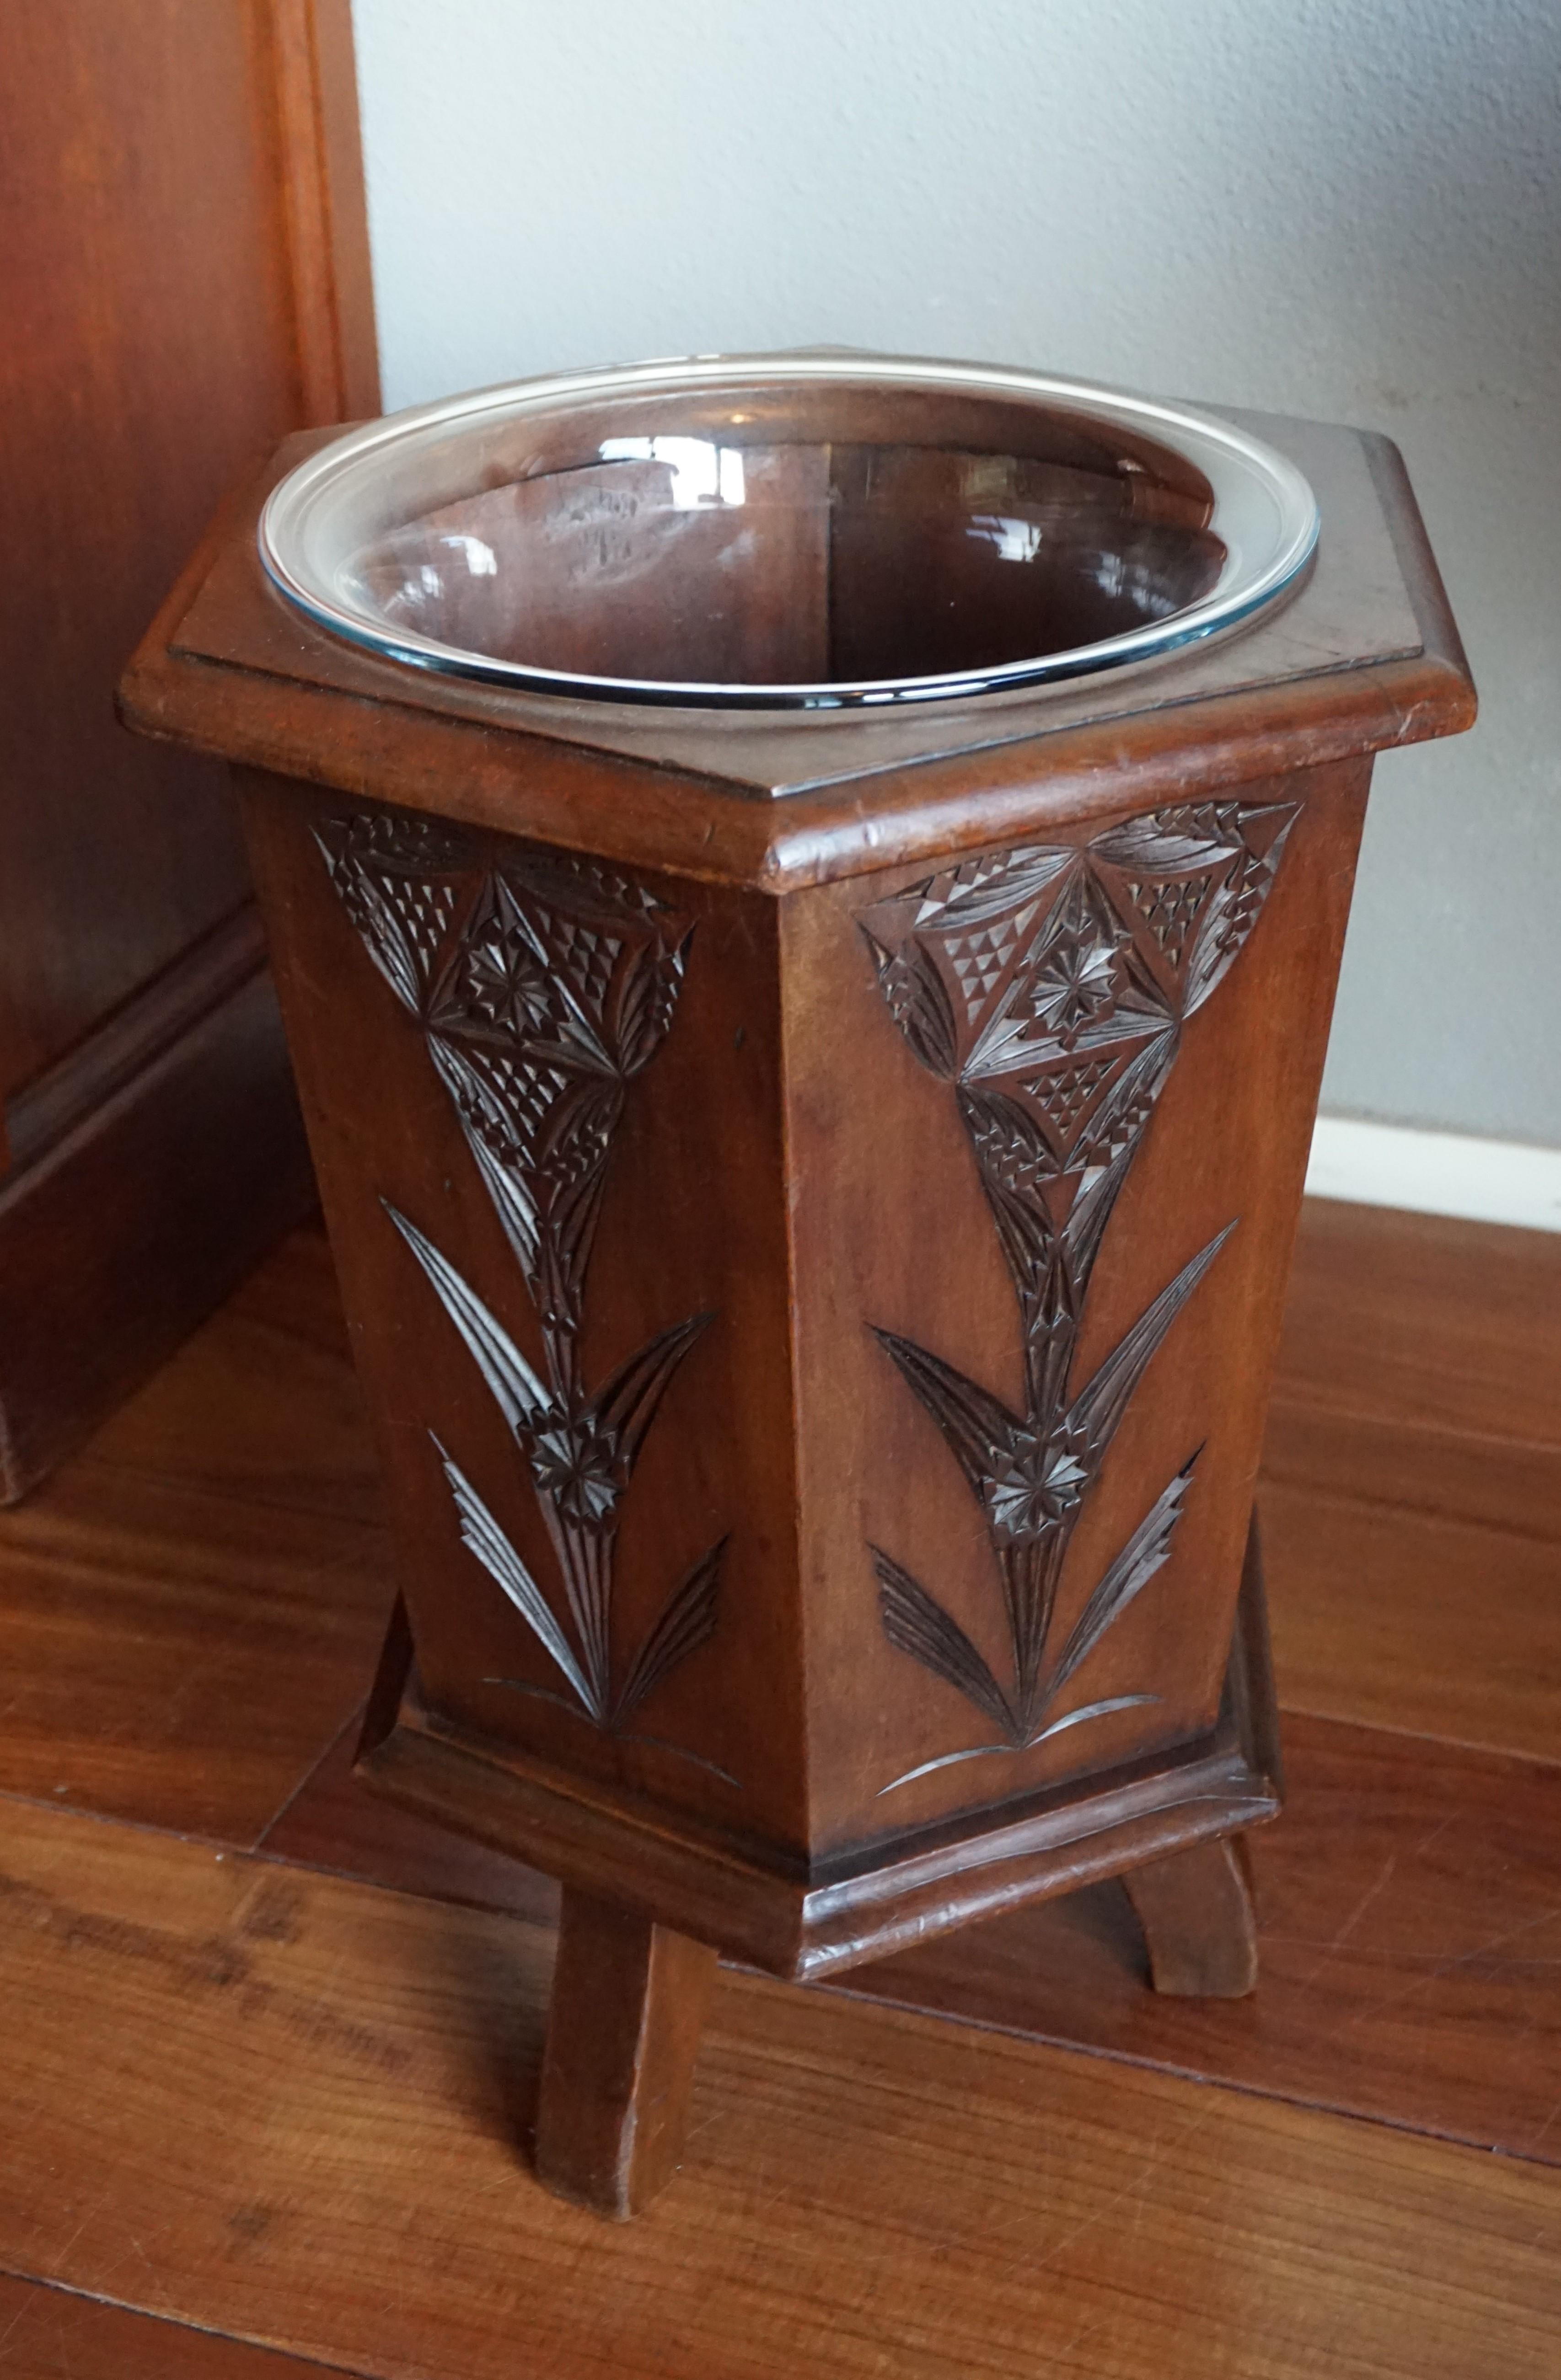 20th Century Antique & Decorative Hand Carved Arts & Crafts Planter / Bucket with Glass Liner